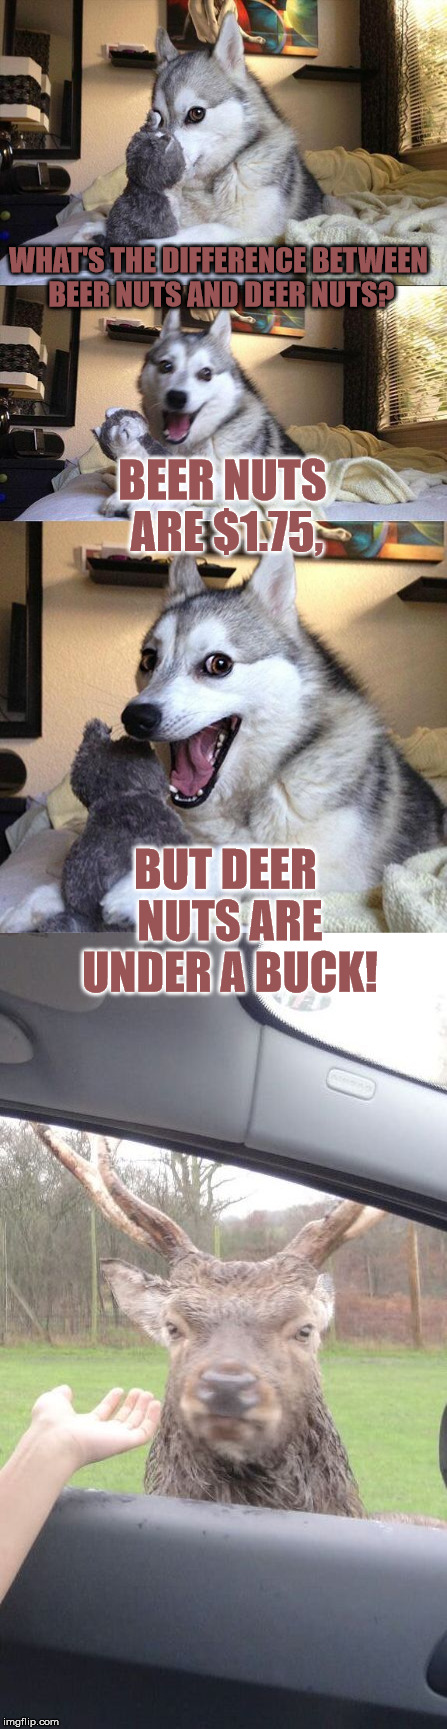 Nuts, nuts, nuts | WHAT'S THE DIFFERENCE BETWEEN BEER NUTS AND DEER NUTS? BEER NUTS ARE $1.75, BUT DEER NUTS ARE UNDER A BUCK! | image tagged in memes,nuts,angry deer,bad pun dog,buck,beer nuts | made w/ Imgflip meme maker